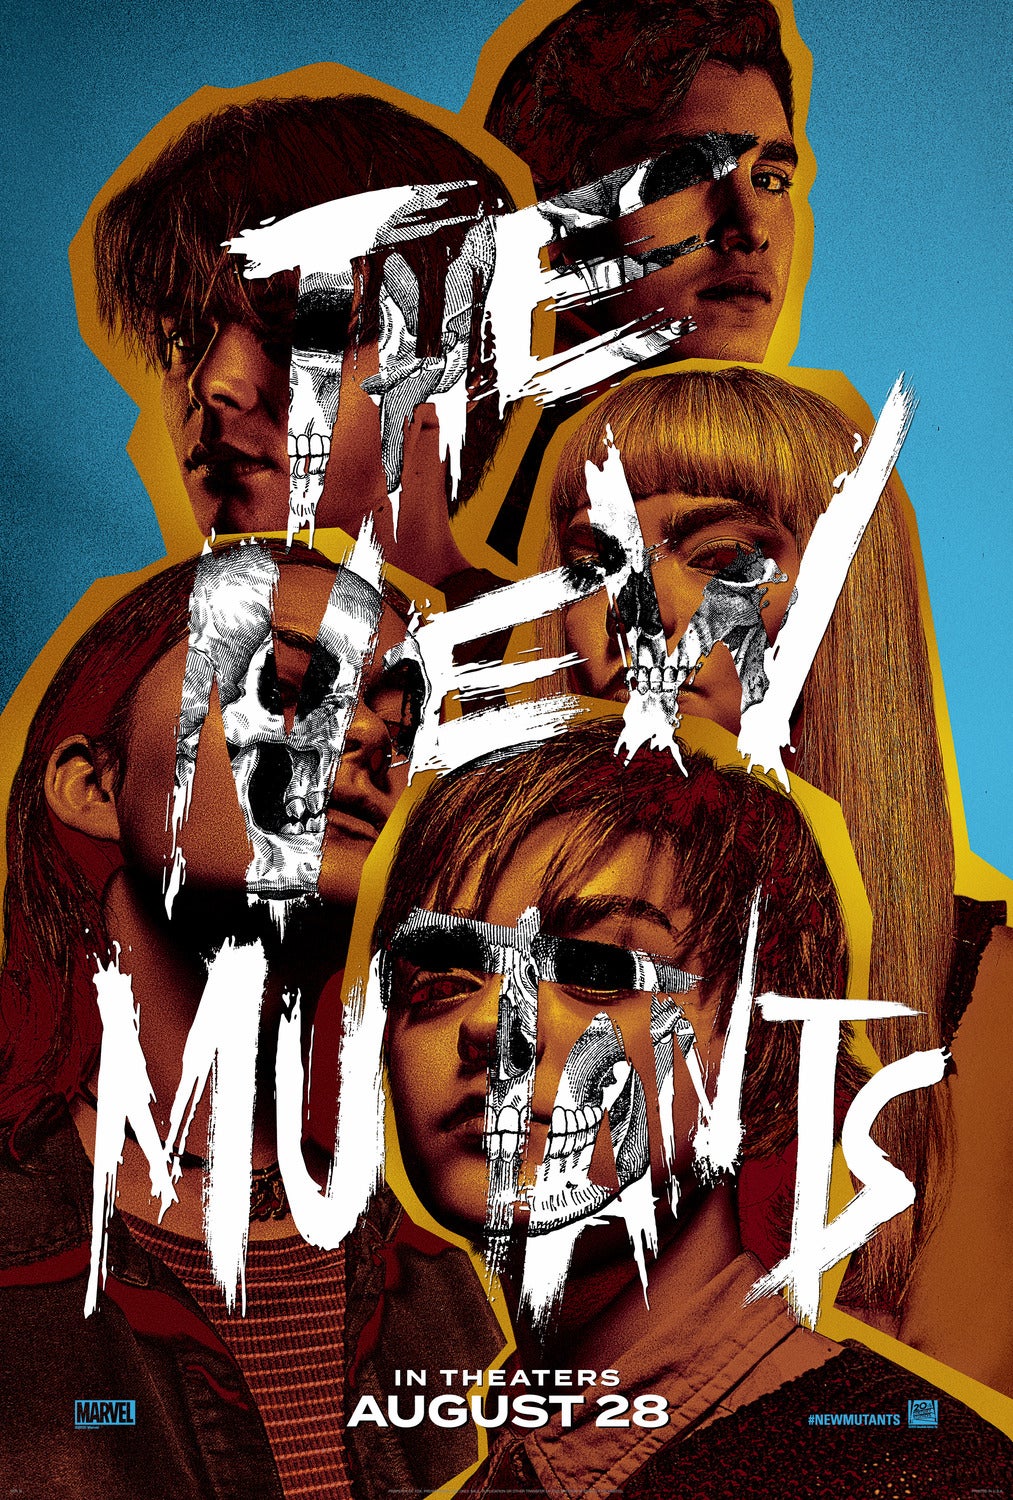 The New Mutants': A Tortured Timeline - Book and Film Globe